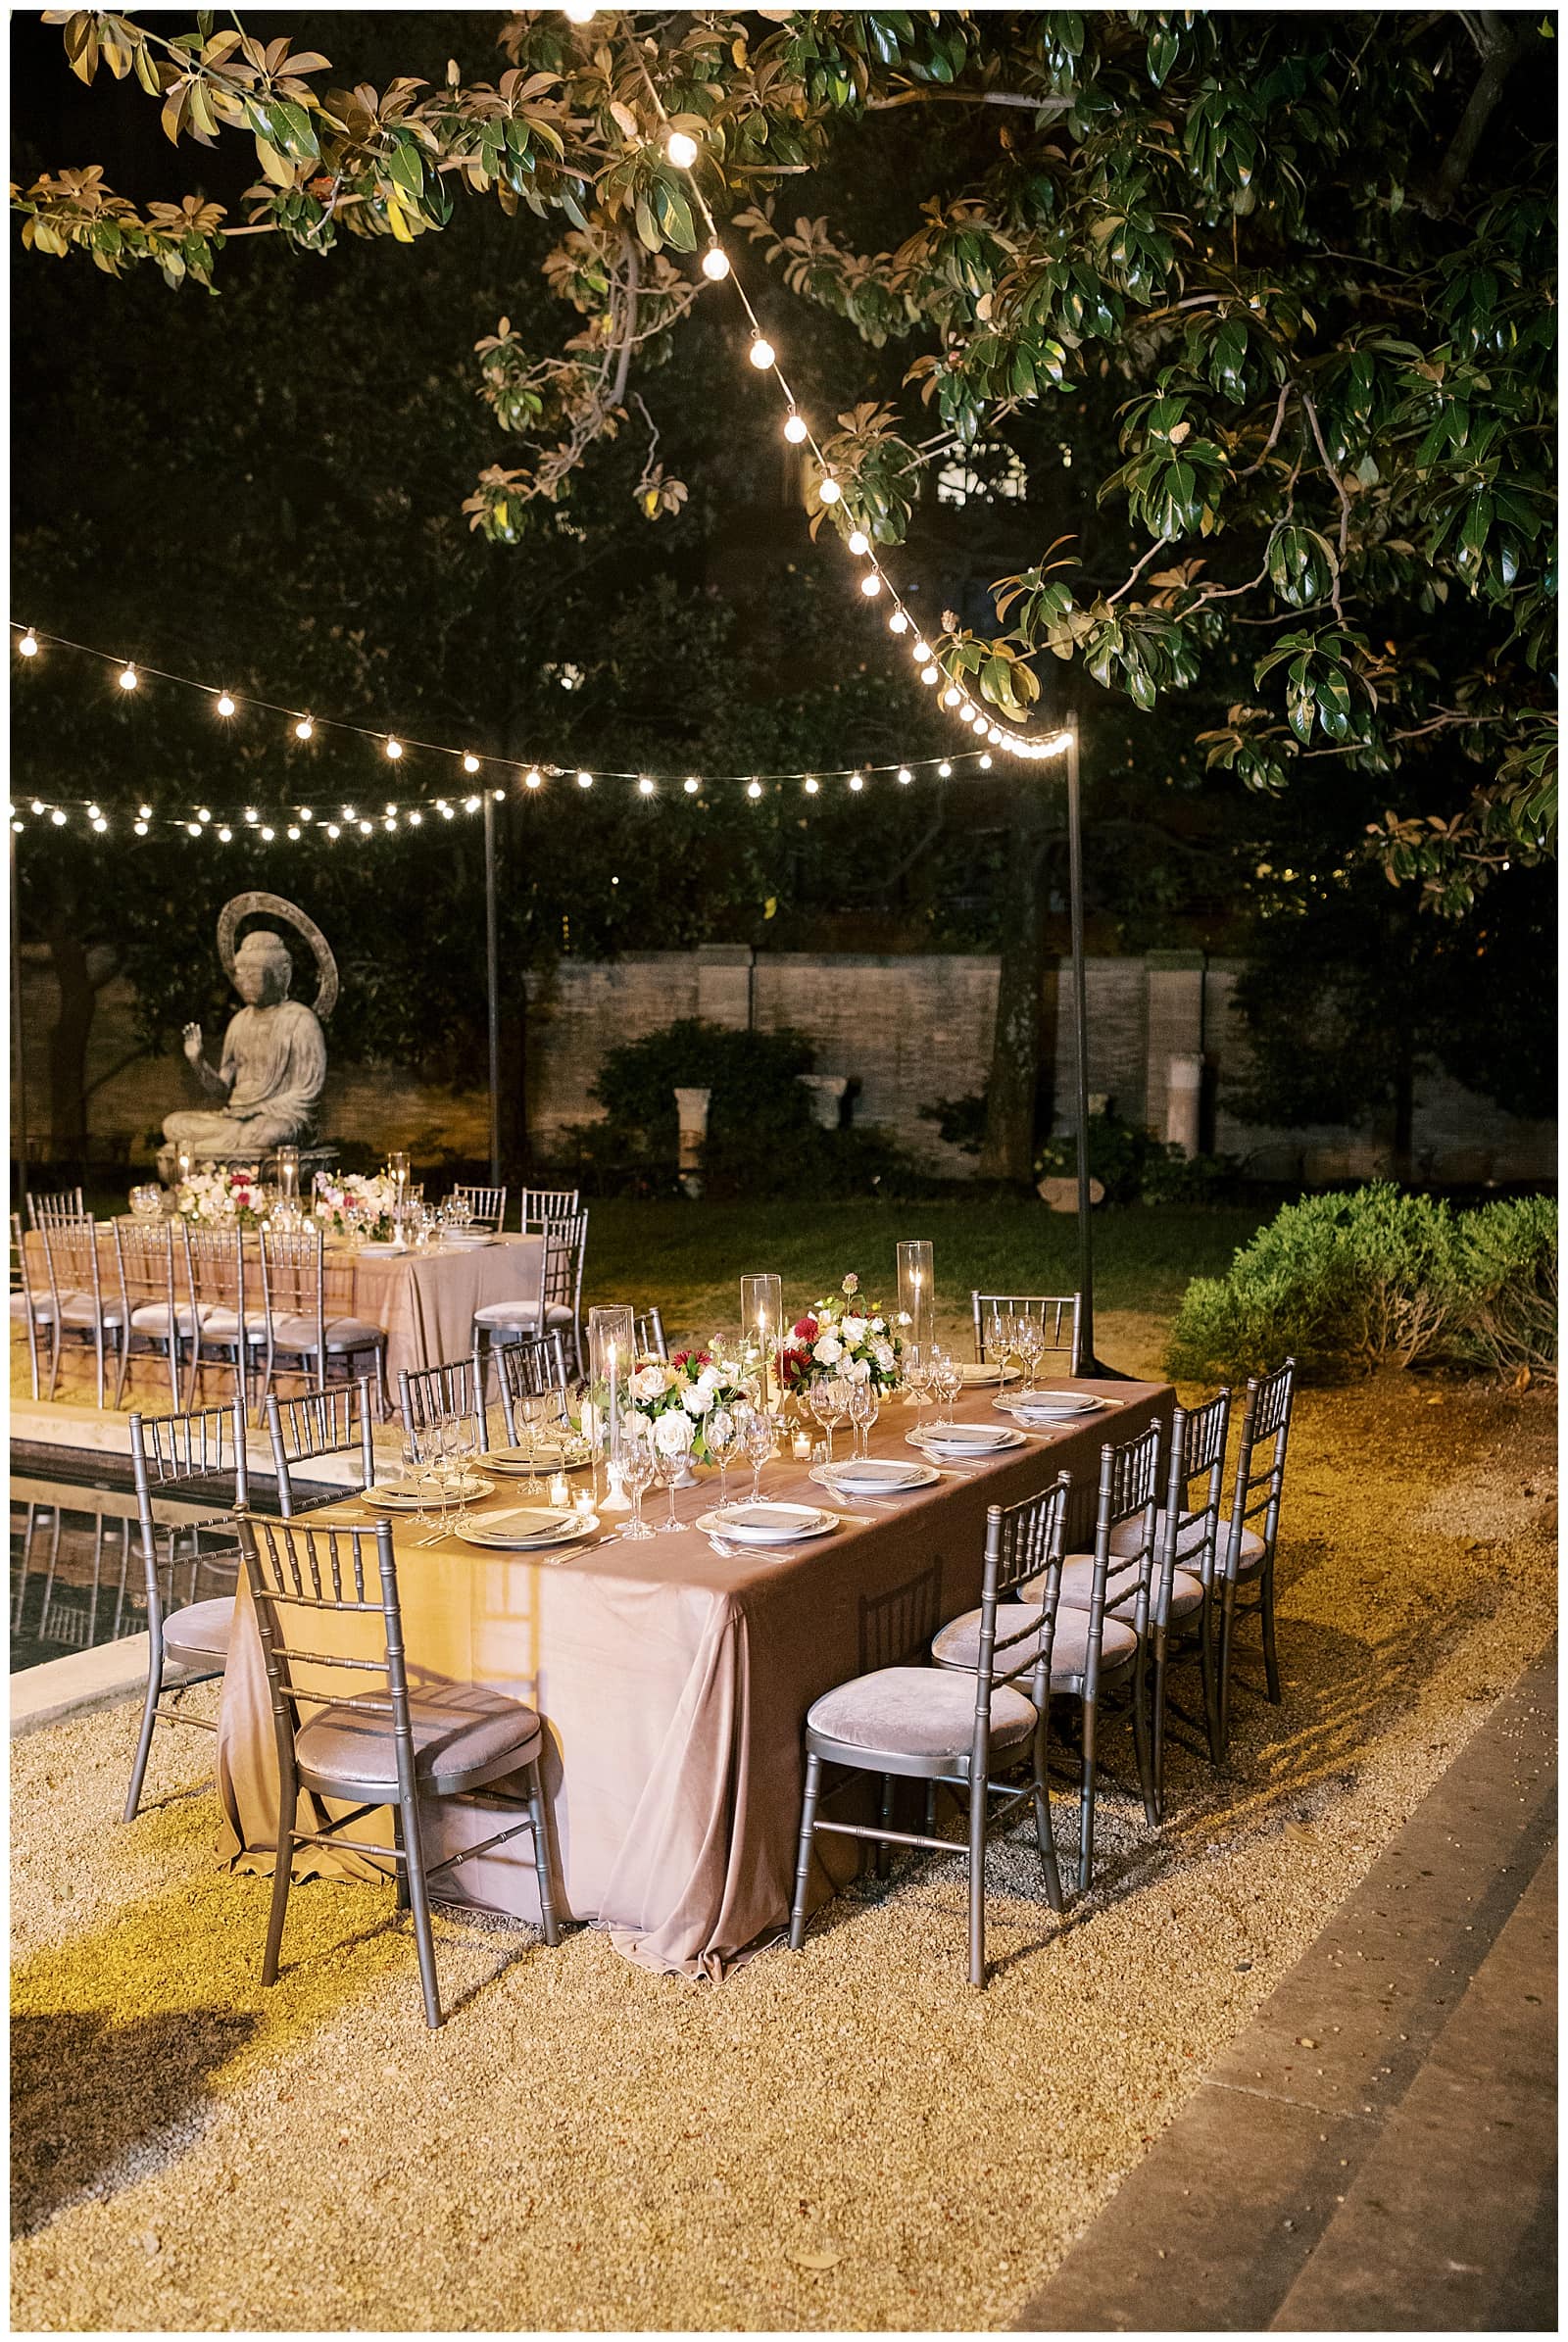 wedding reception table styled outside at night at the Anderson house with glowing string lights hanging above